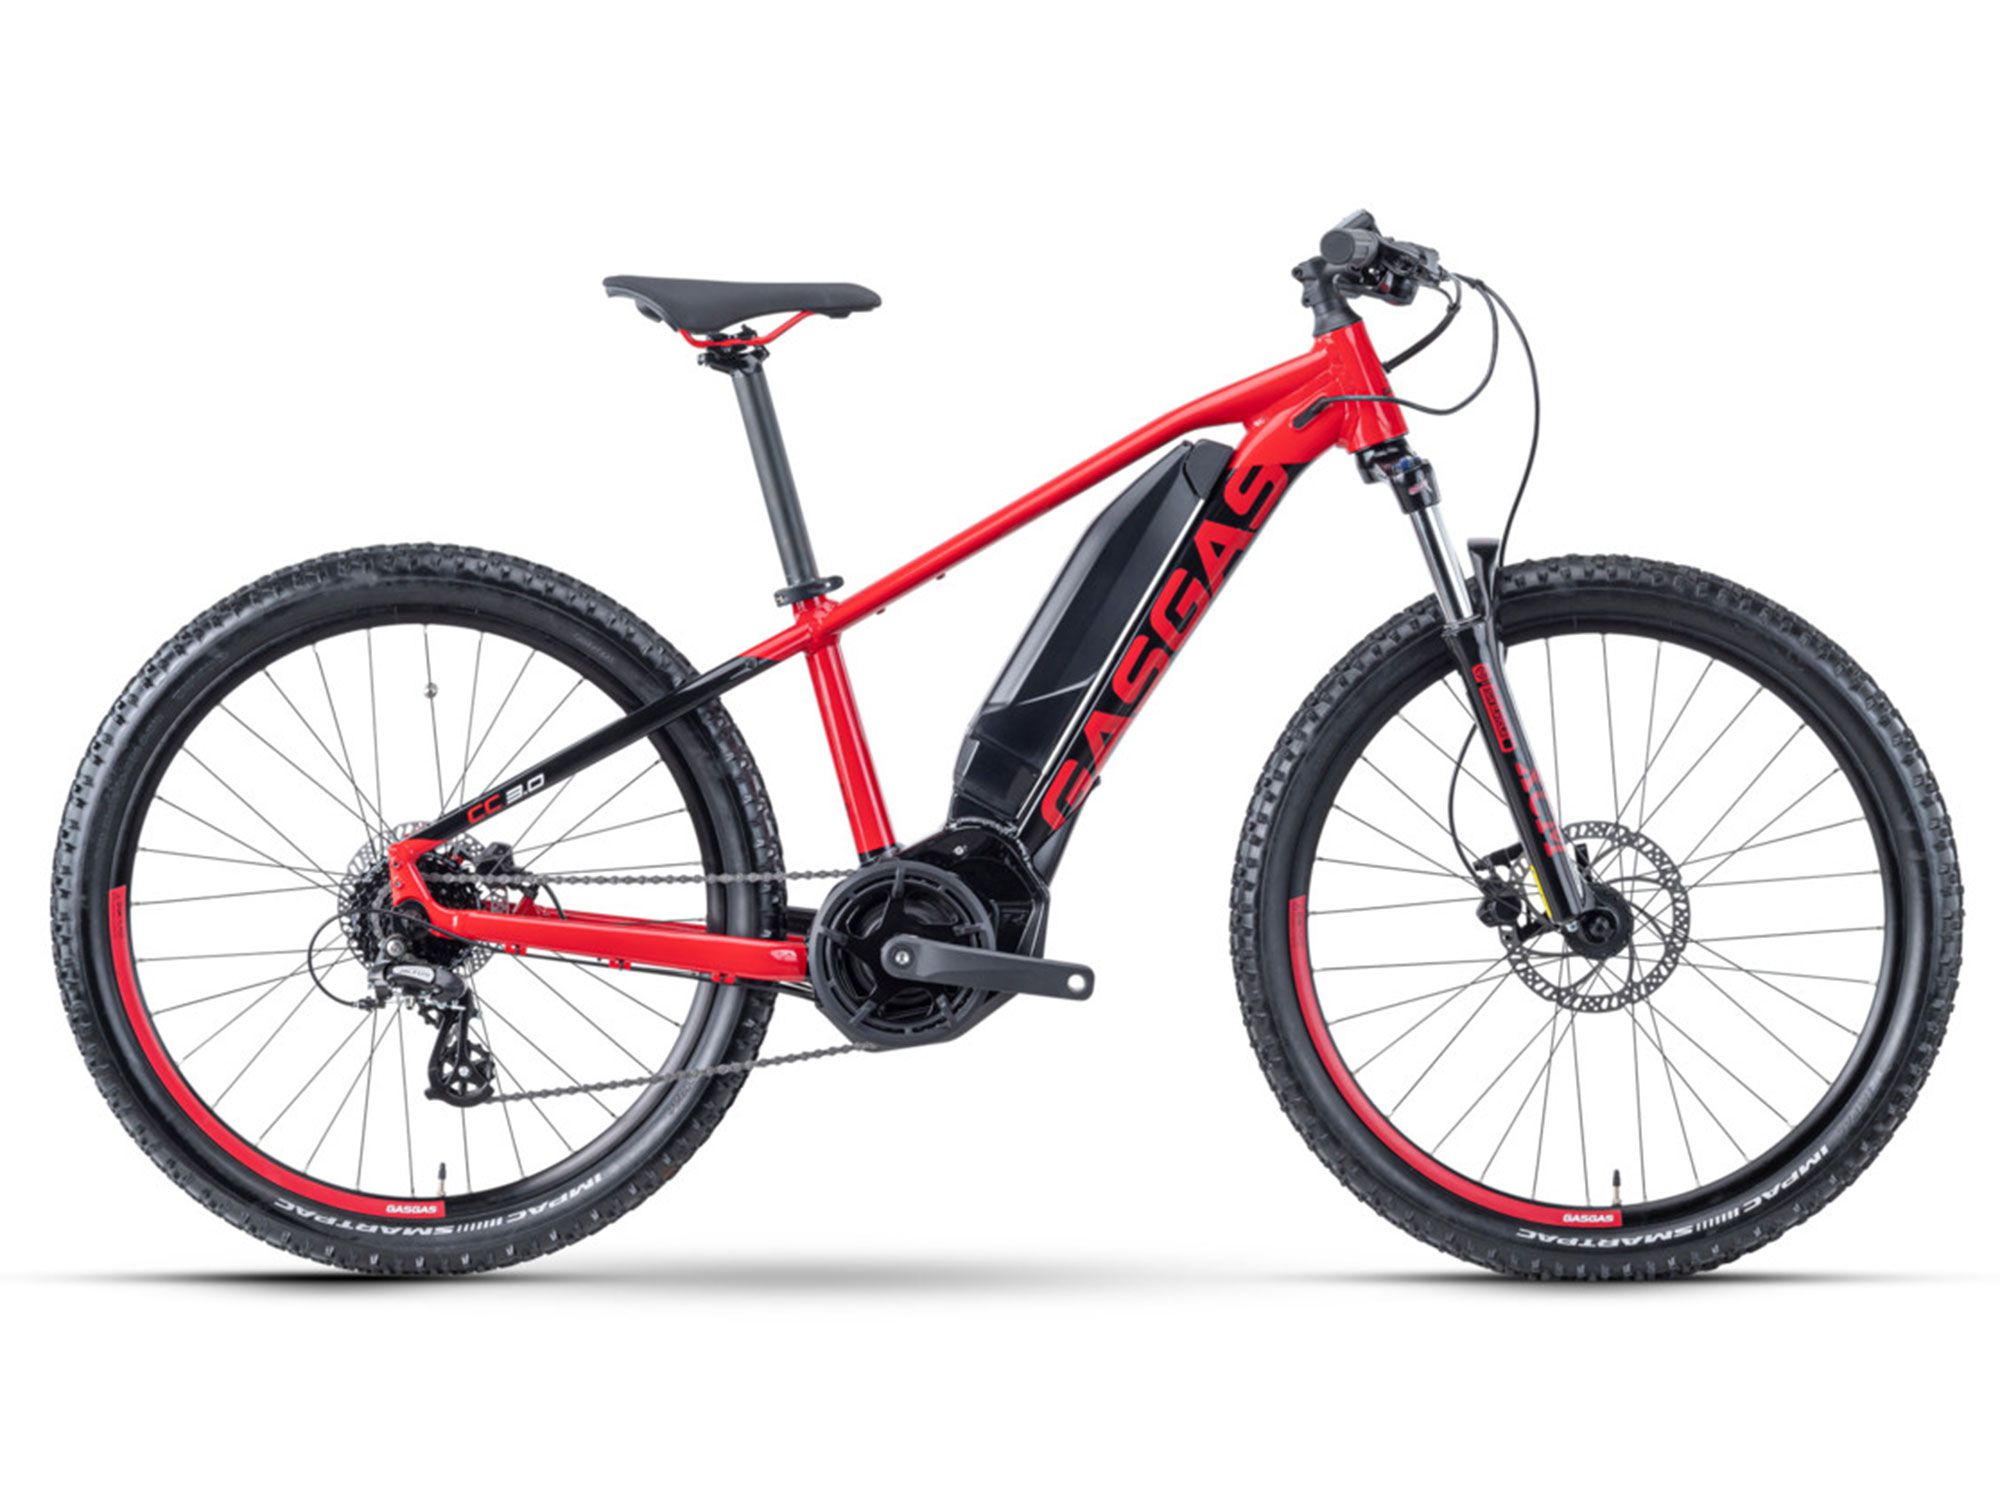 The Cross Country 3.0 is specially designed for younger riders.